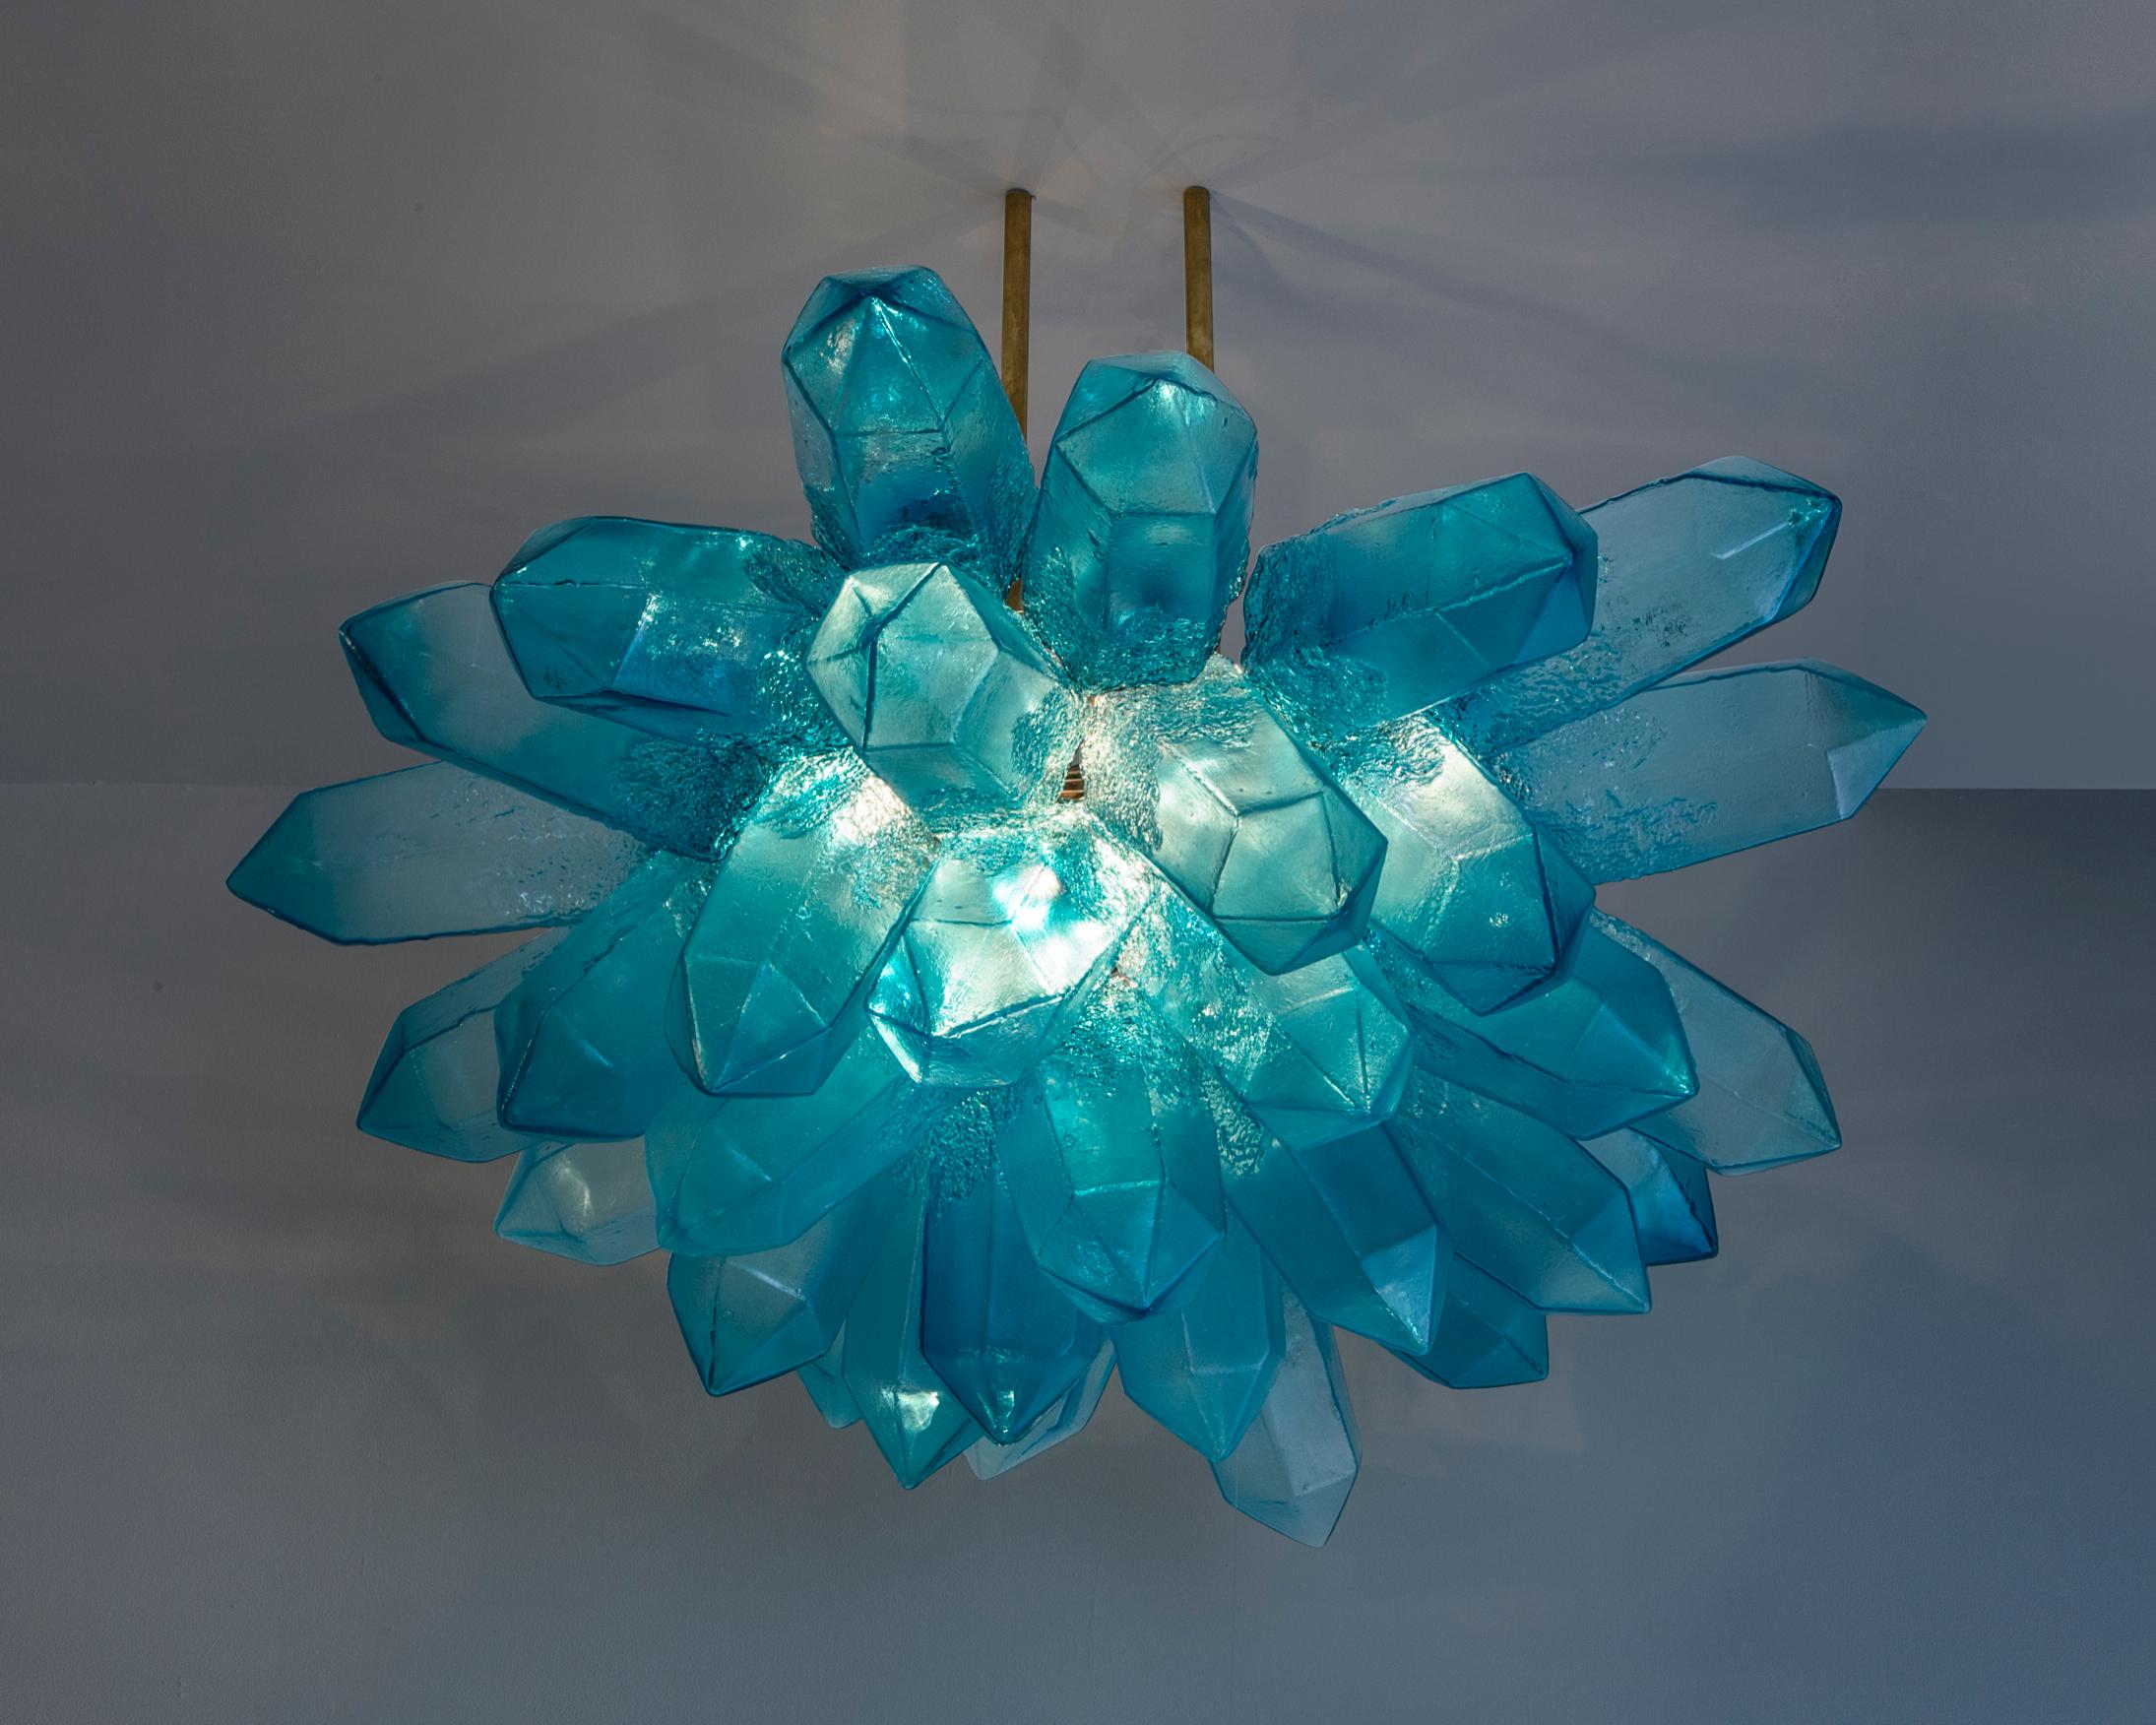 Made to order crystal cluster illuminated sculpture in blue hand blown glass. Designed and made by Jeff Zimmerman. Lead time 14-16 weeks. 